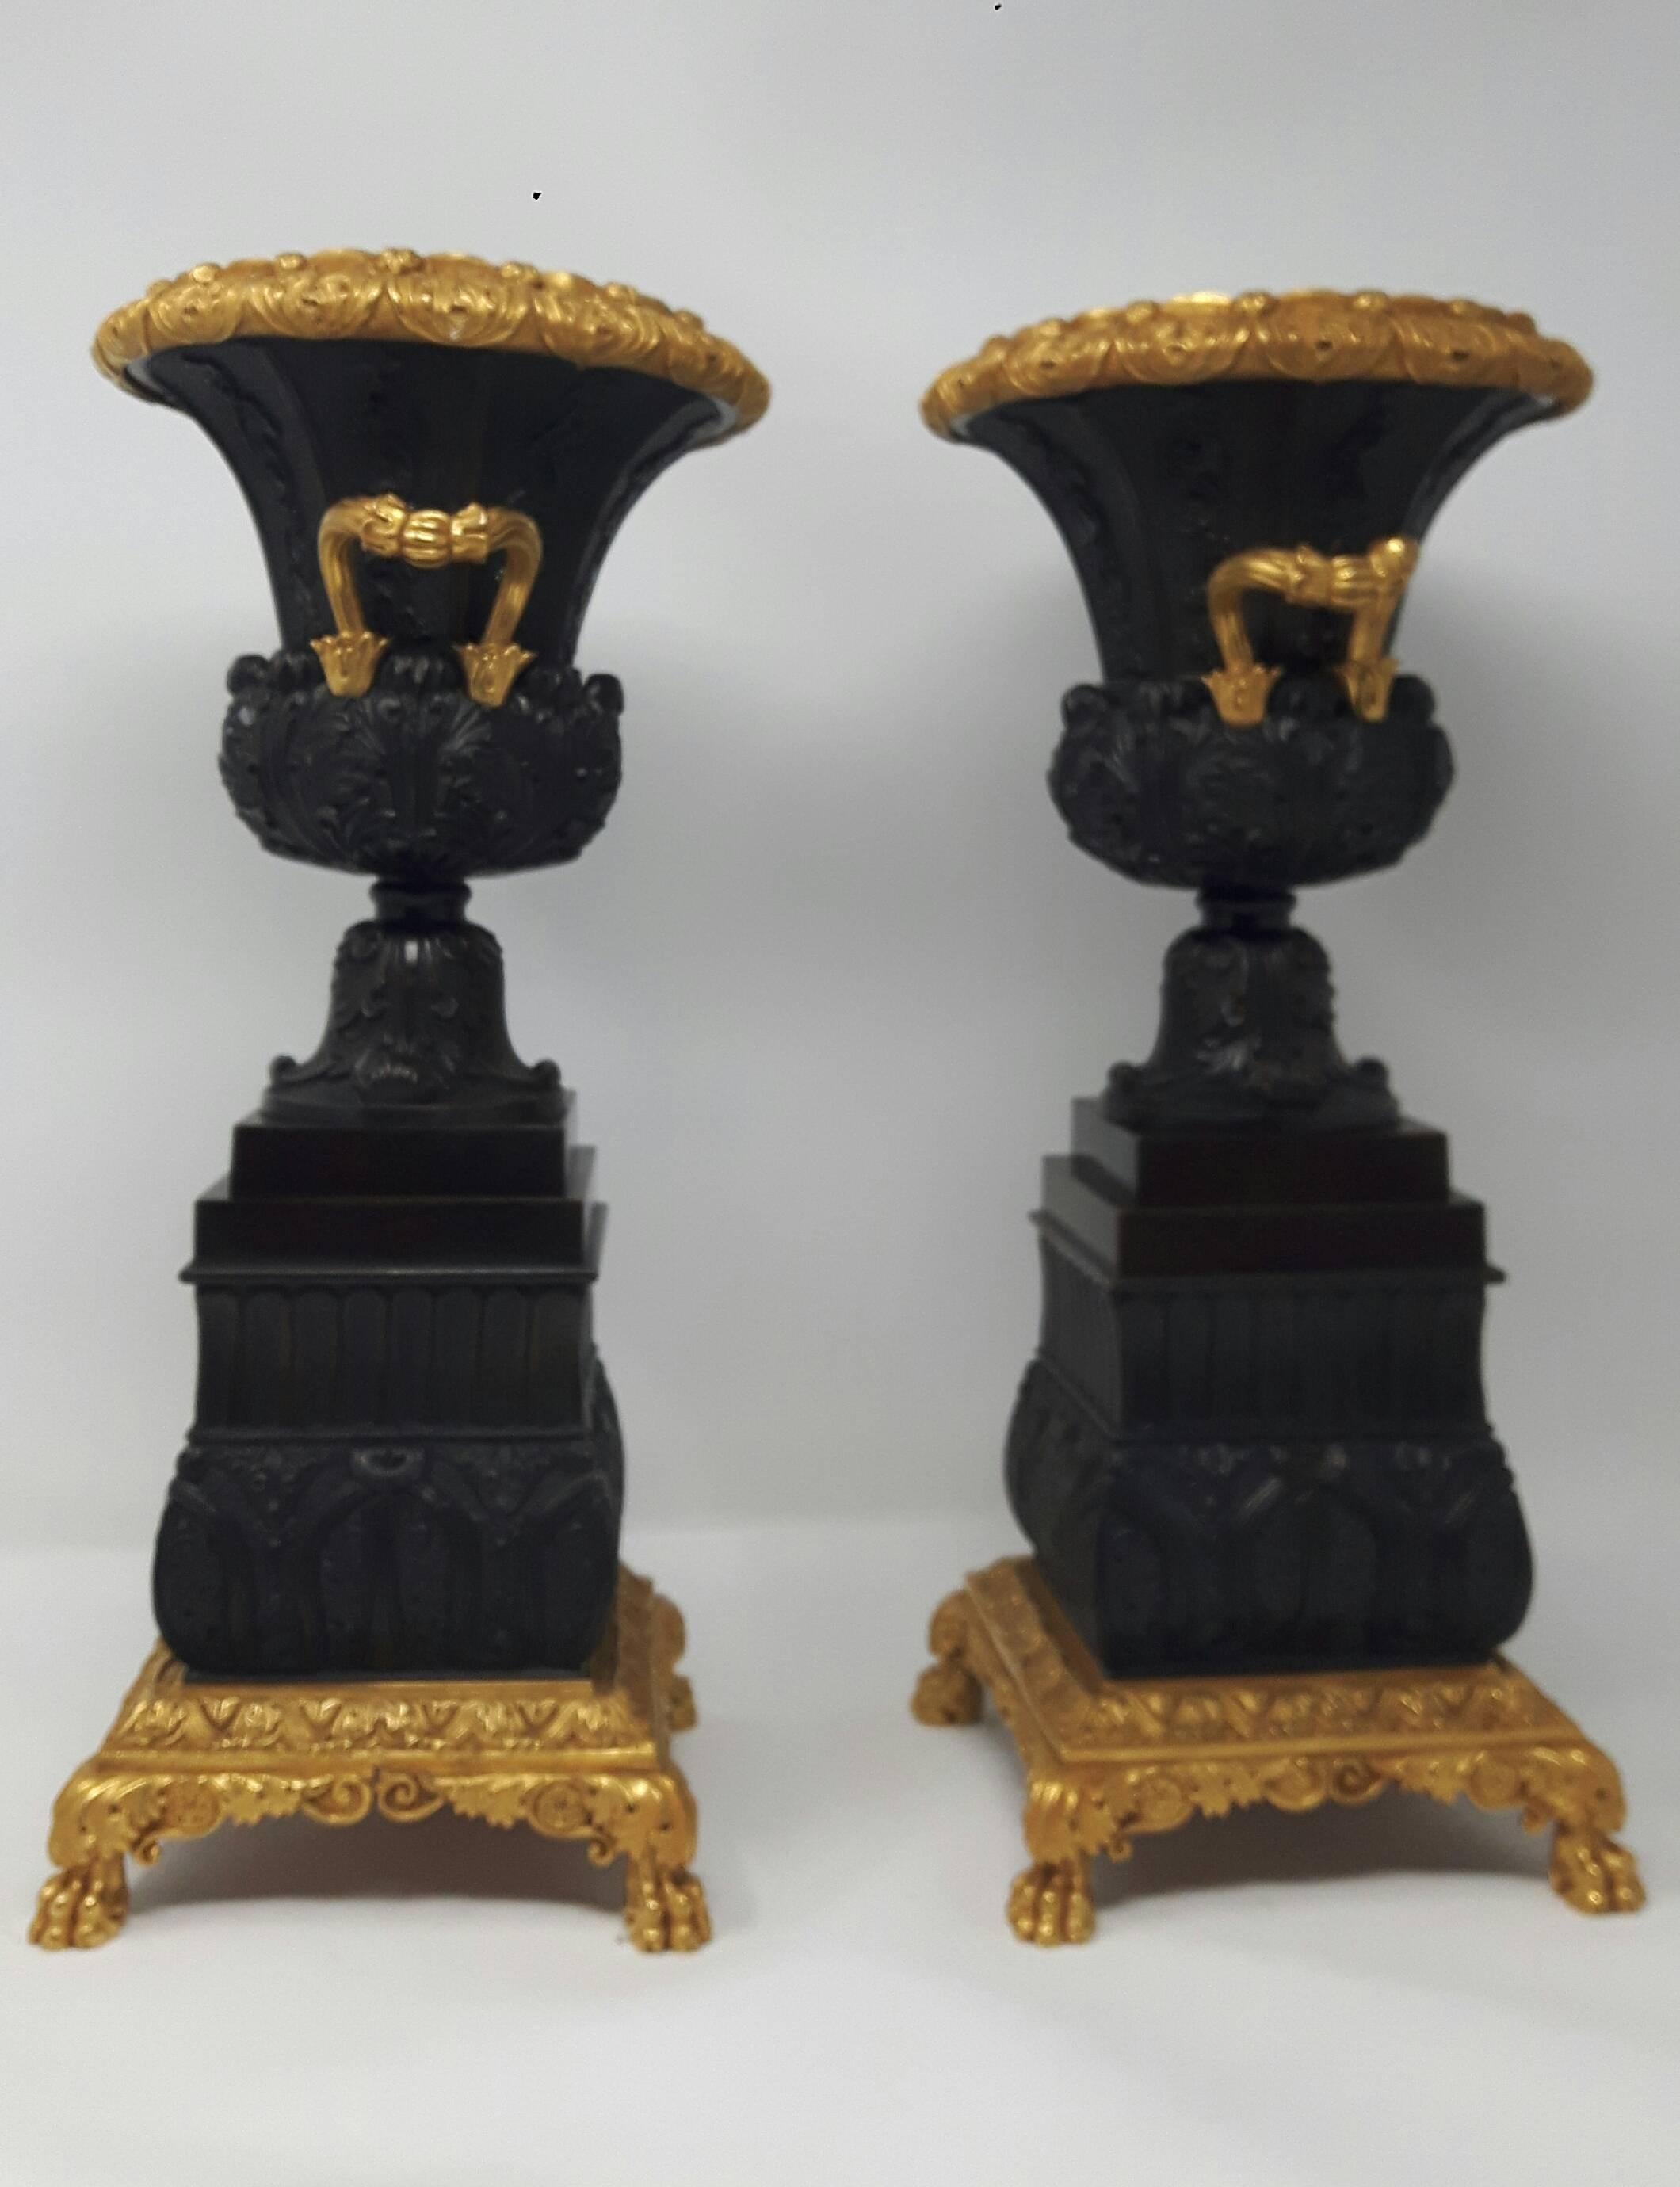 A delicately cast pair of twin handle bronze and ormolu urns in neoclassical style with deep moulded acanthus leaf design and garland of flowers, the entirety resting on gilded lion paws.